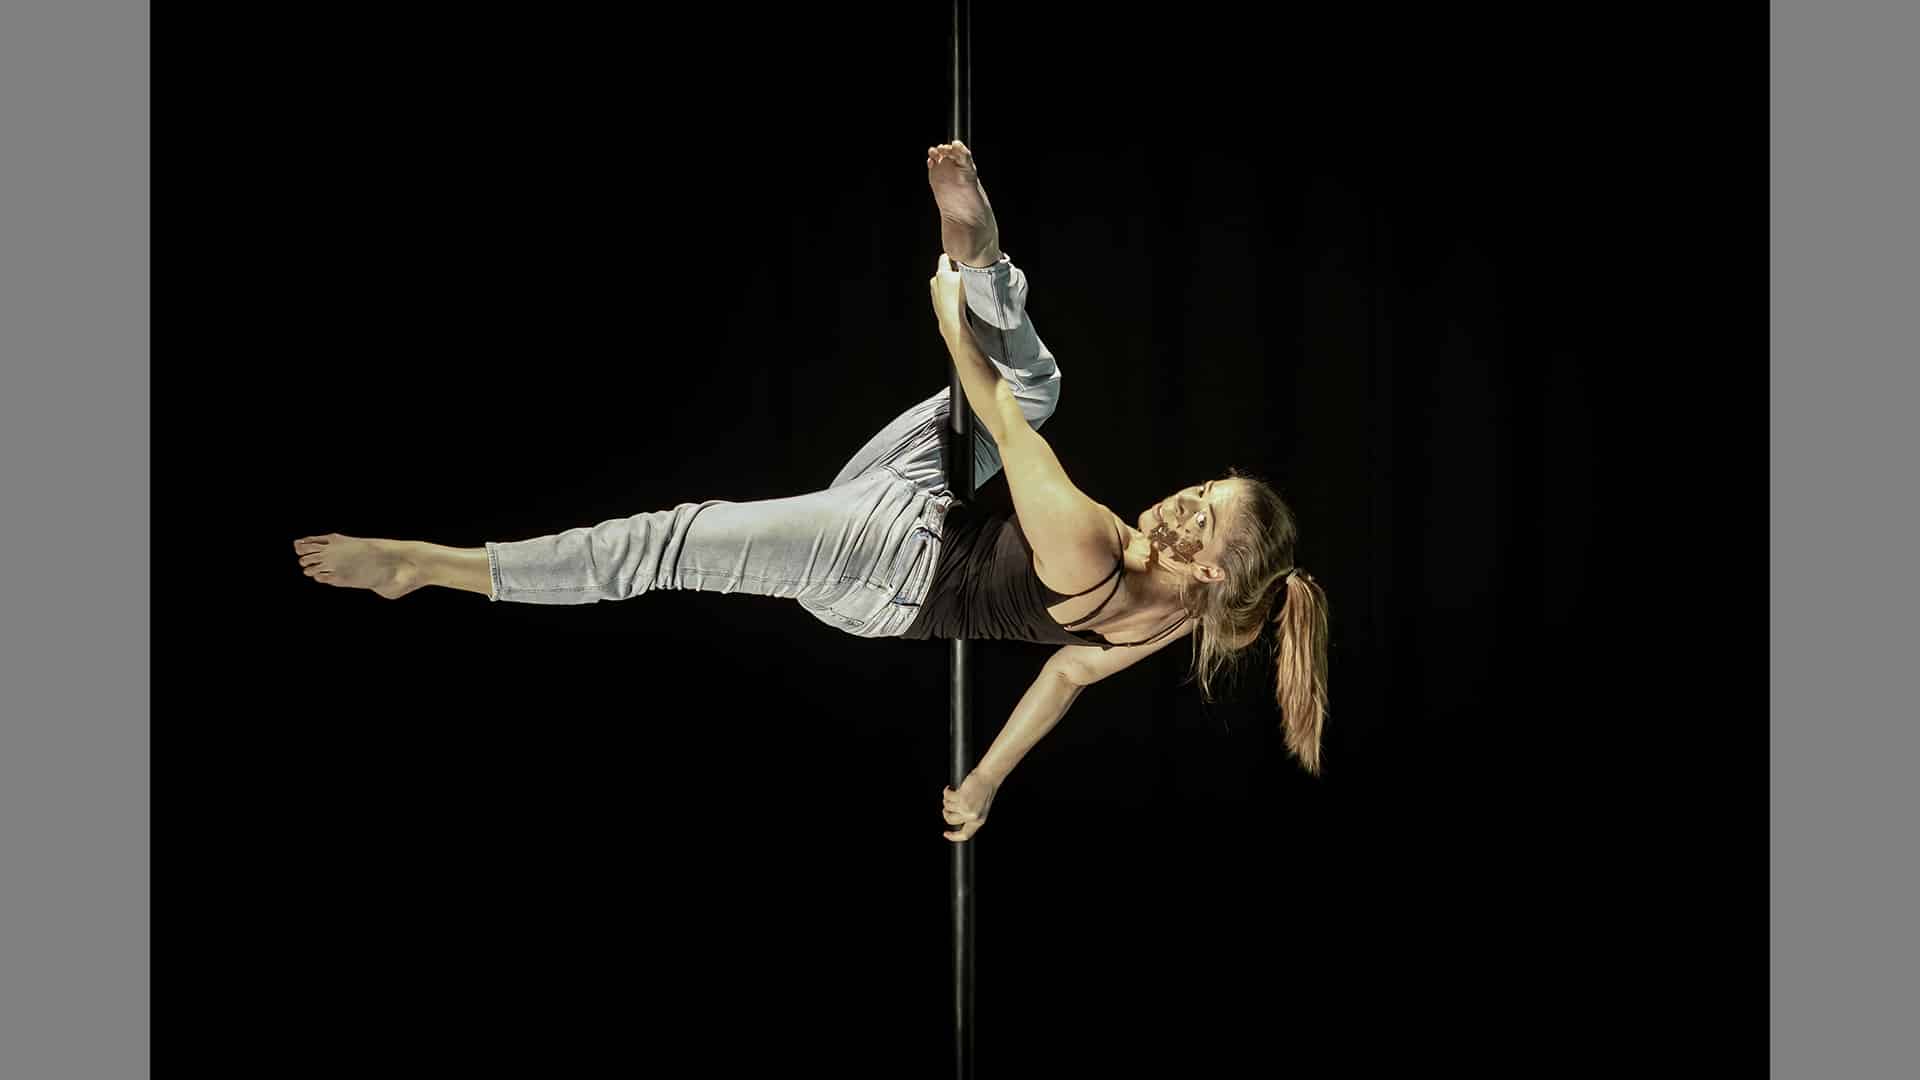 A performer holds themselves horizontally off a Chinese pole